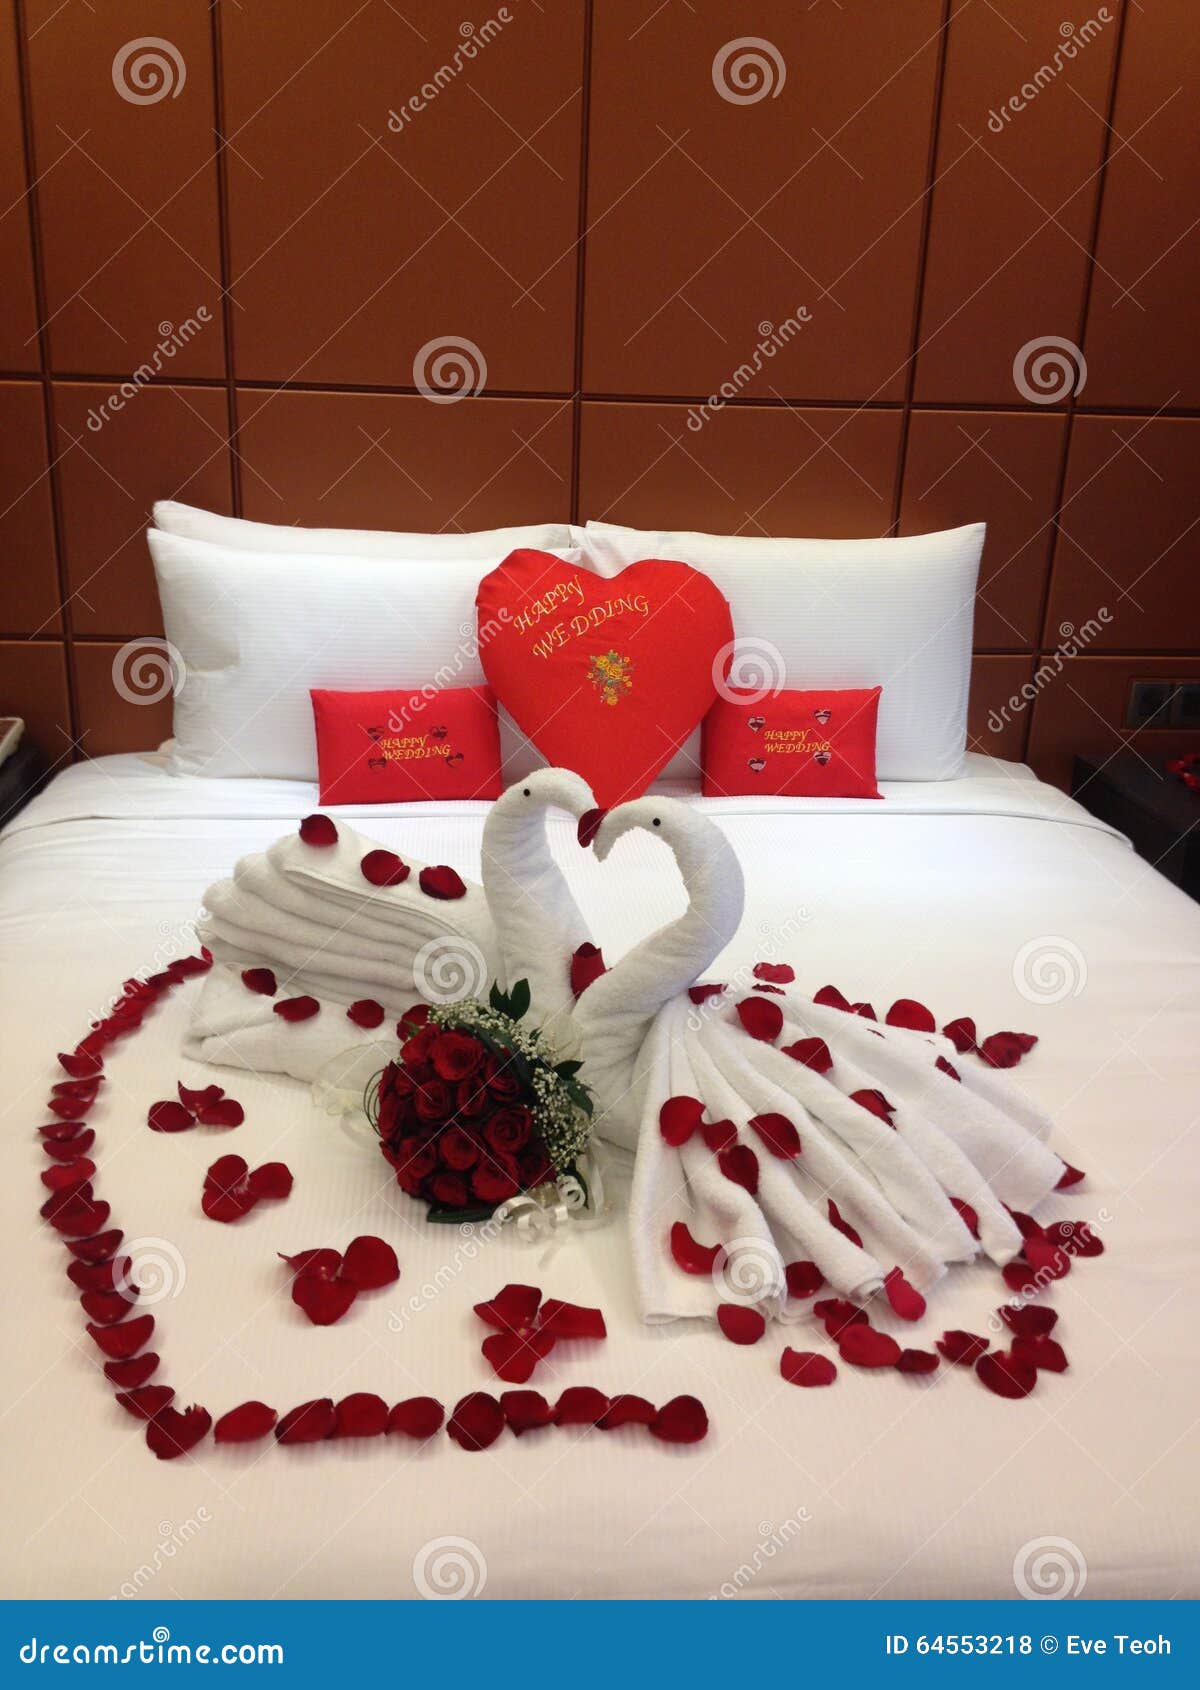 Nice Decoration for Wedding Night in Hotel Stock Photo - Image of ...